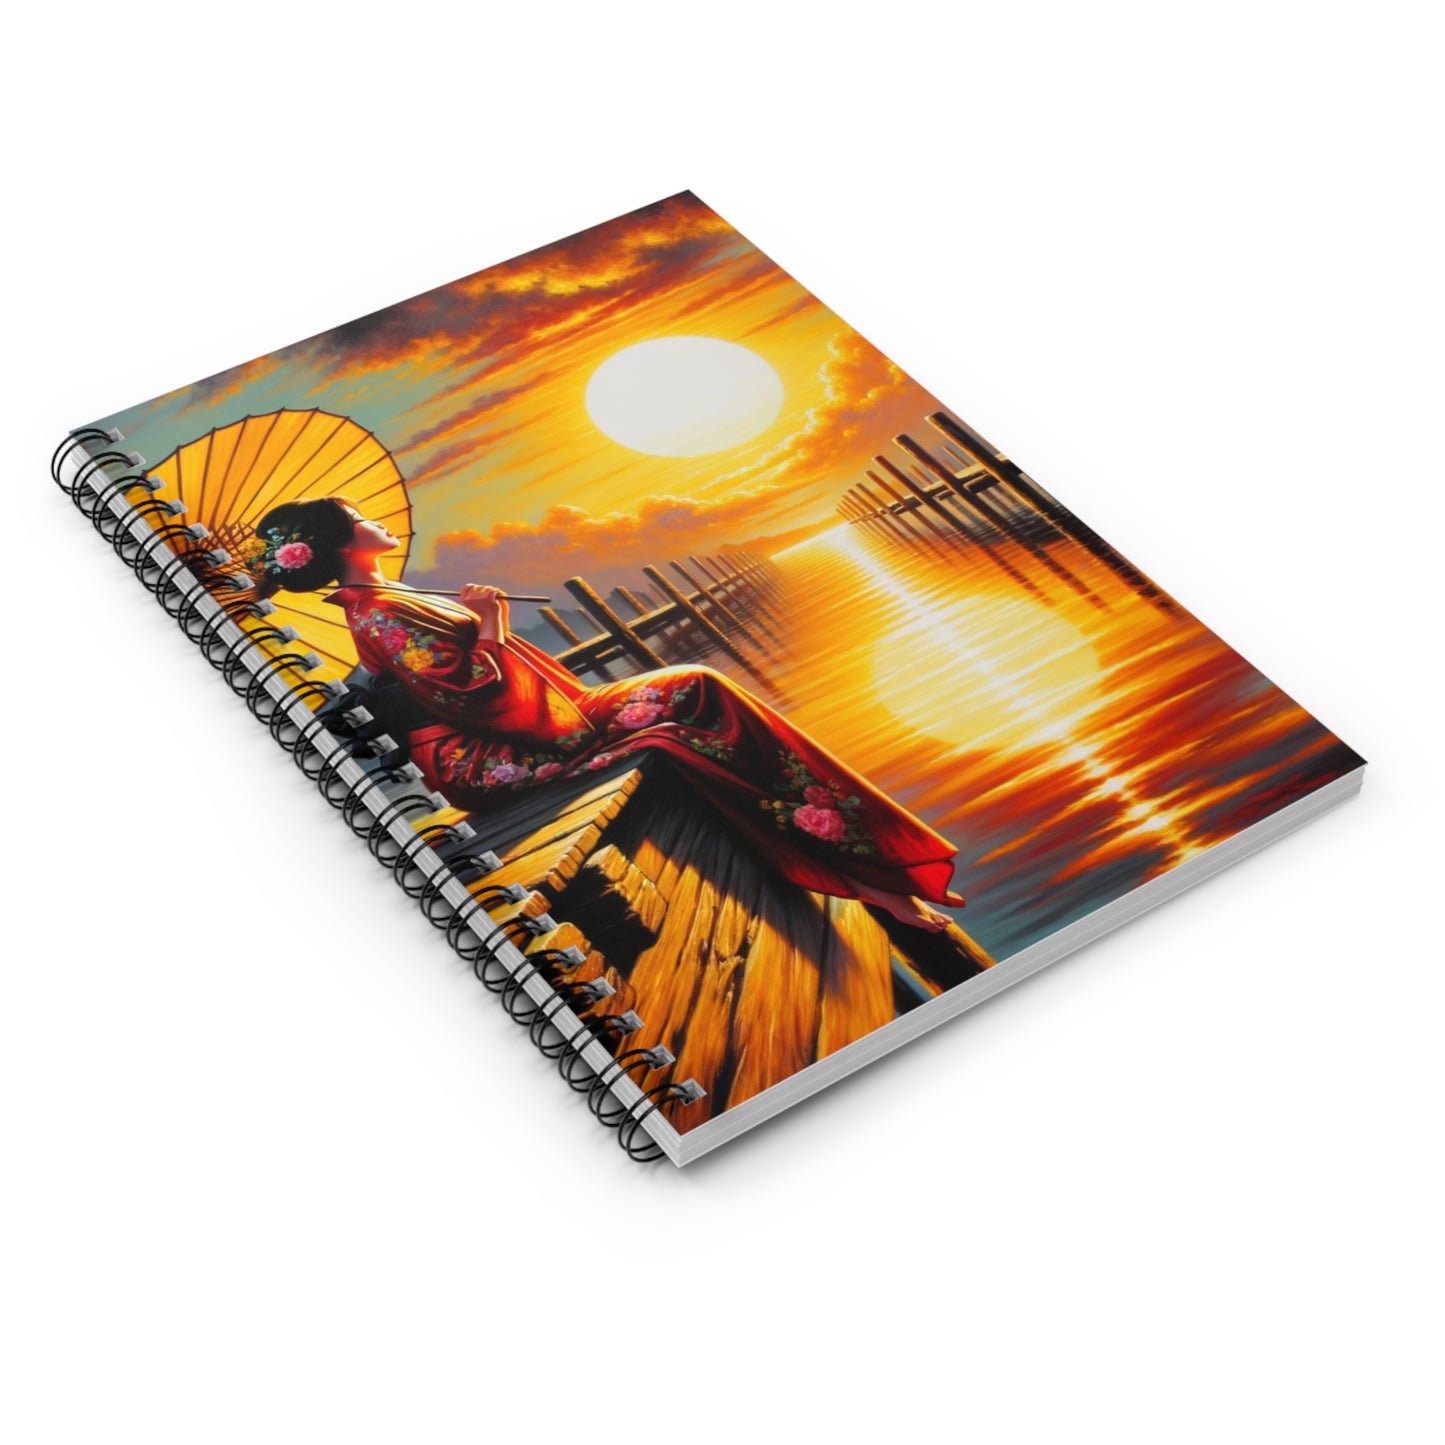 "Golden Reflections" - The Alien Spiral Notebook (Ruled Line) Impressionism Style